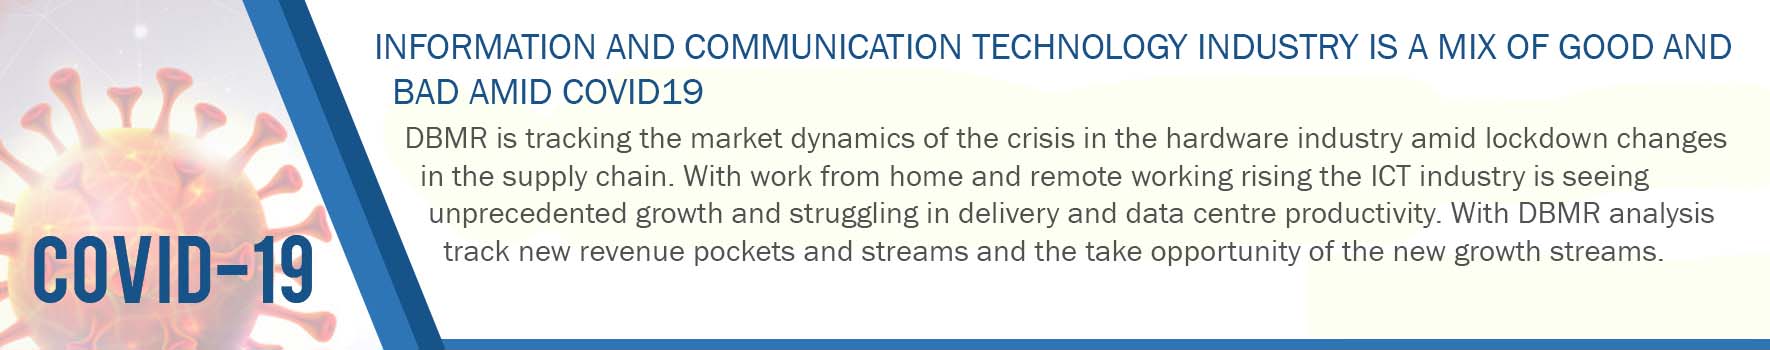 information-and-communication-technology